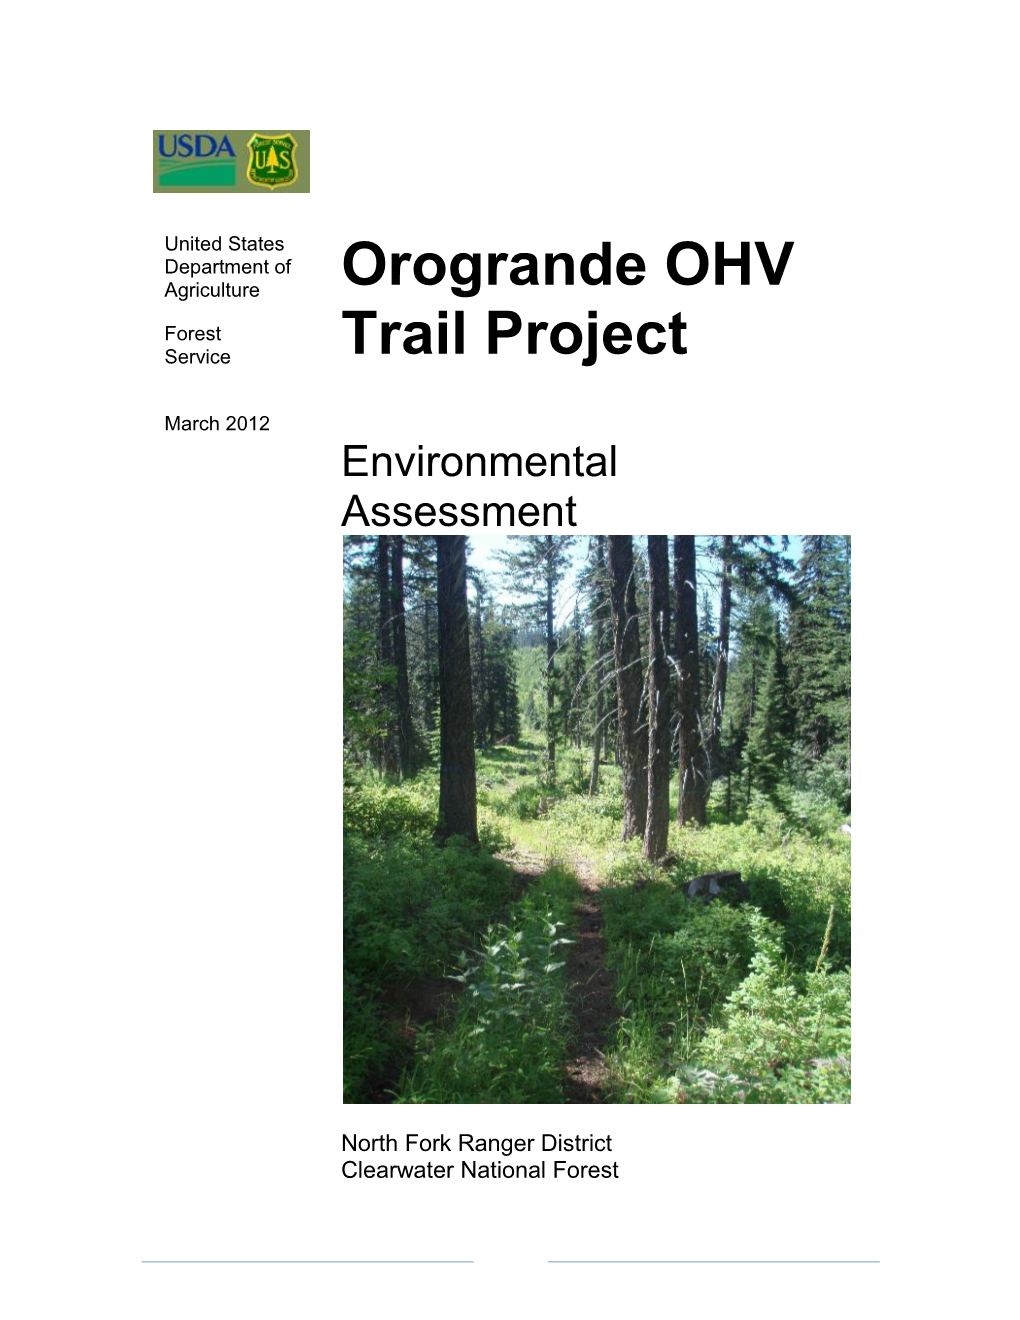 Orogrande OHV Trail Project Environmental Assessment